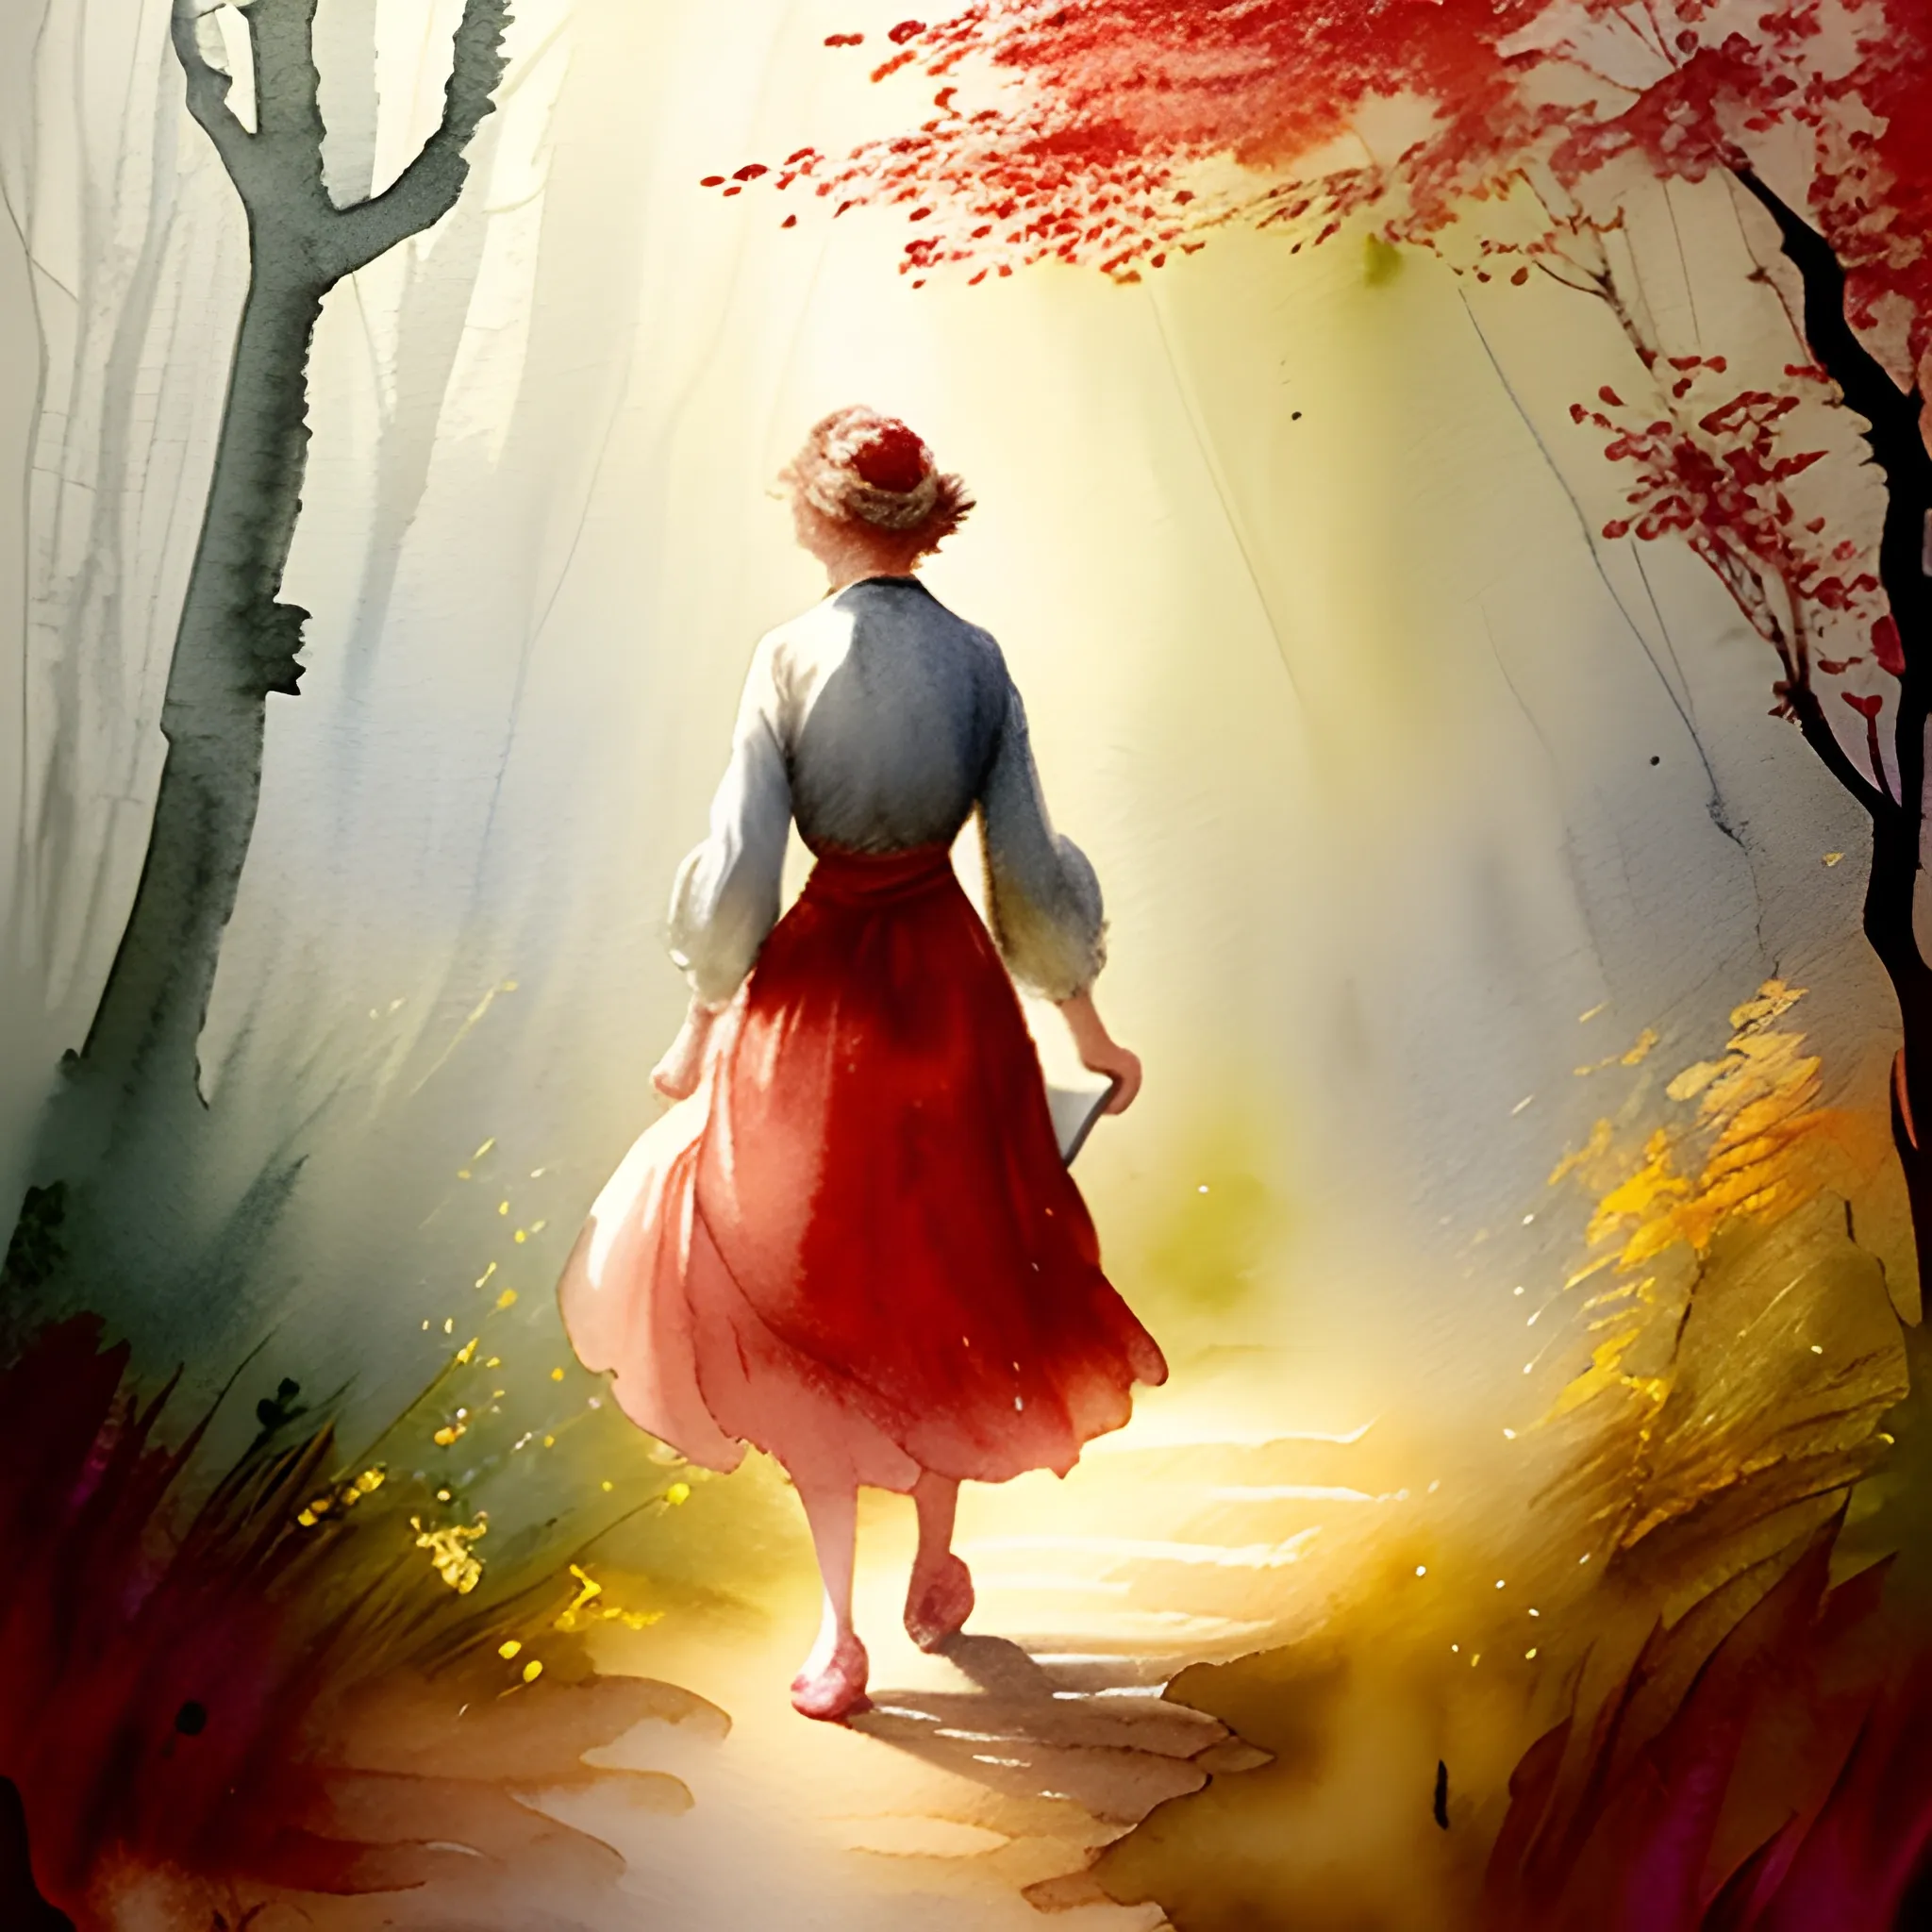 Illustrate a woman using the watercolor technique of the renowned painter J.M.W. Turner, as she wanders through a mystical forest, her steps guided by the faint glow of fireflies. Employ Turner's watercolor techniques, with a dominant use of the color red, to capture the essence of her journey. She carries a journal to document her adventures.